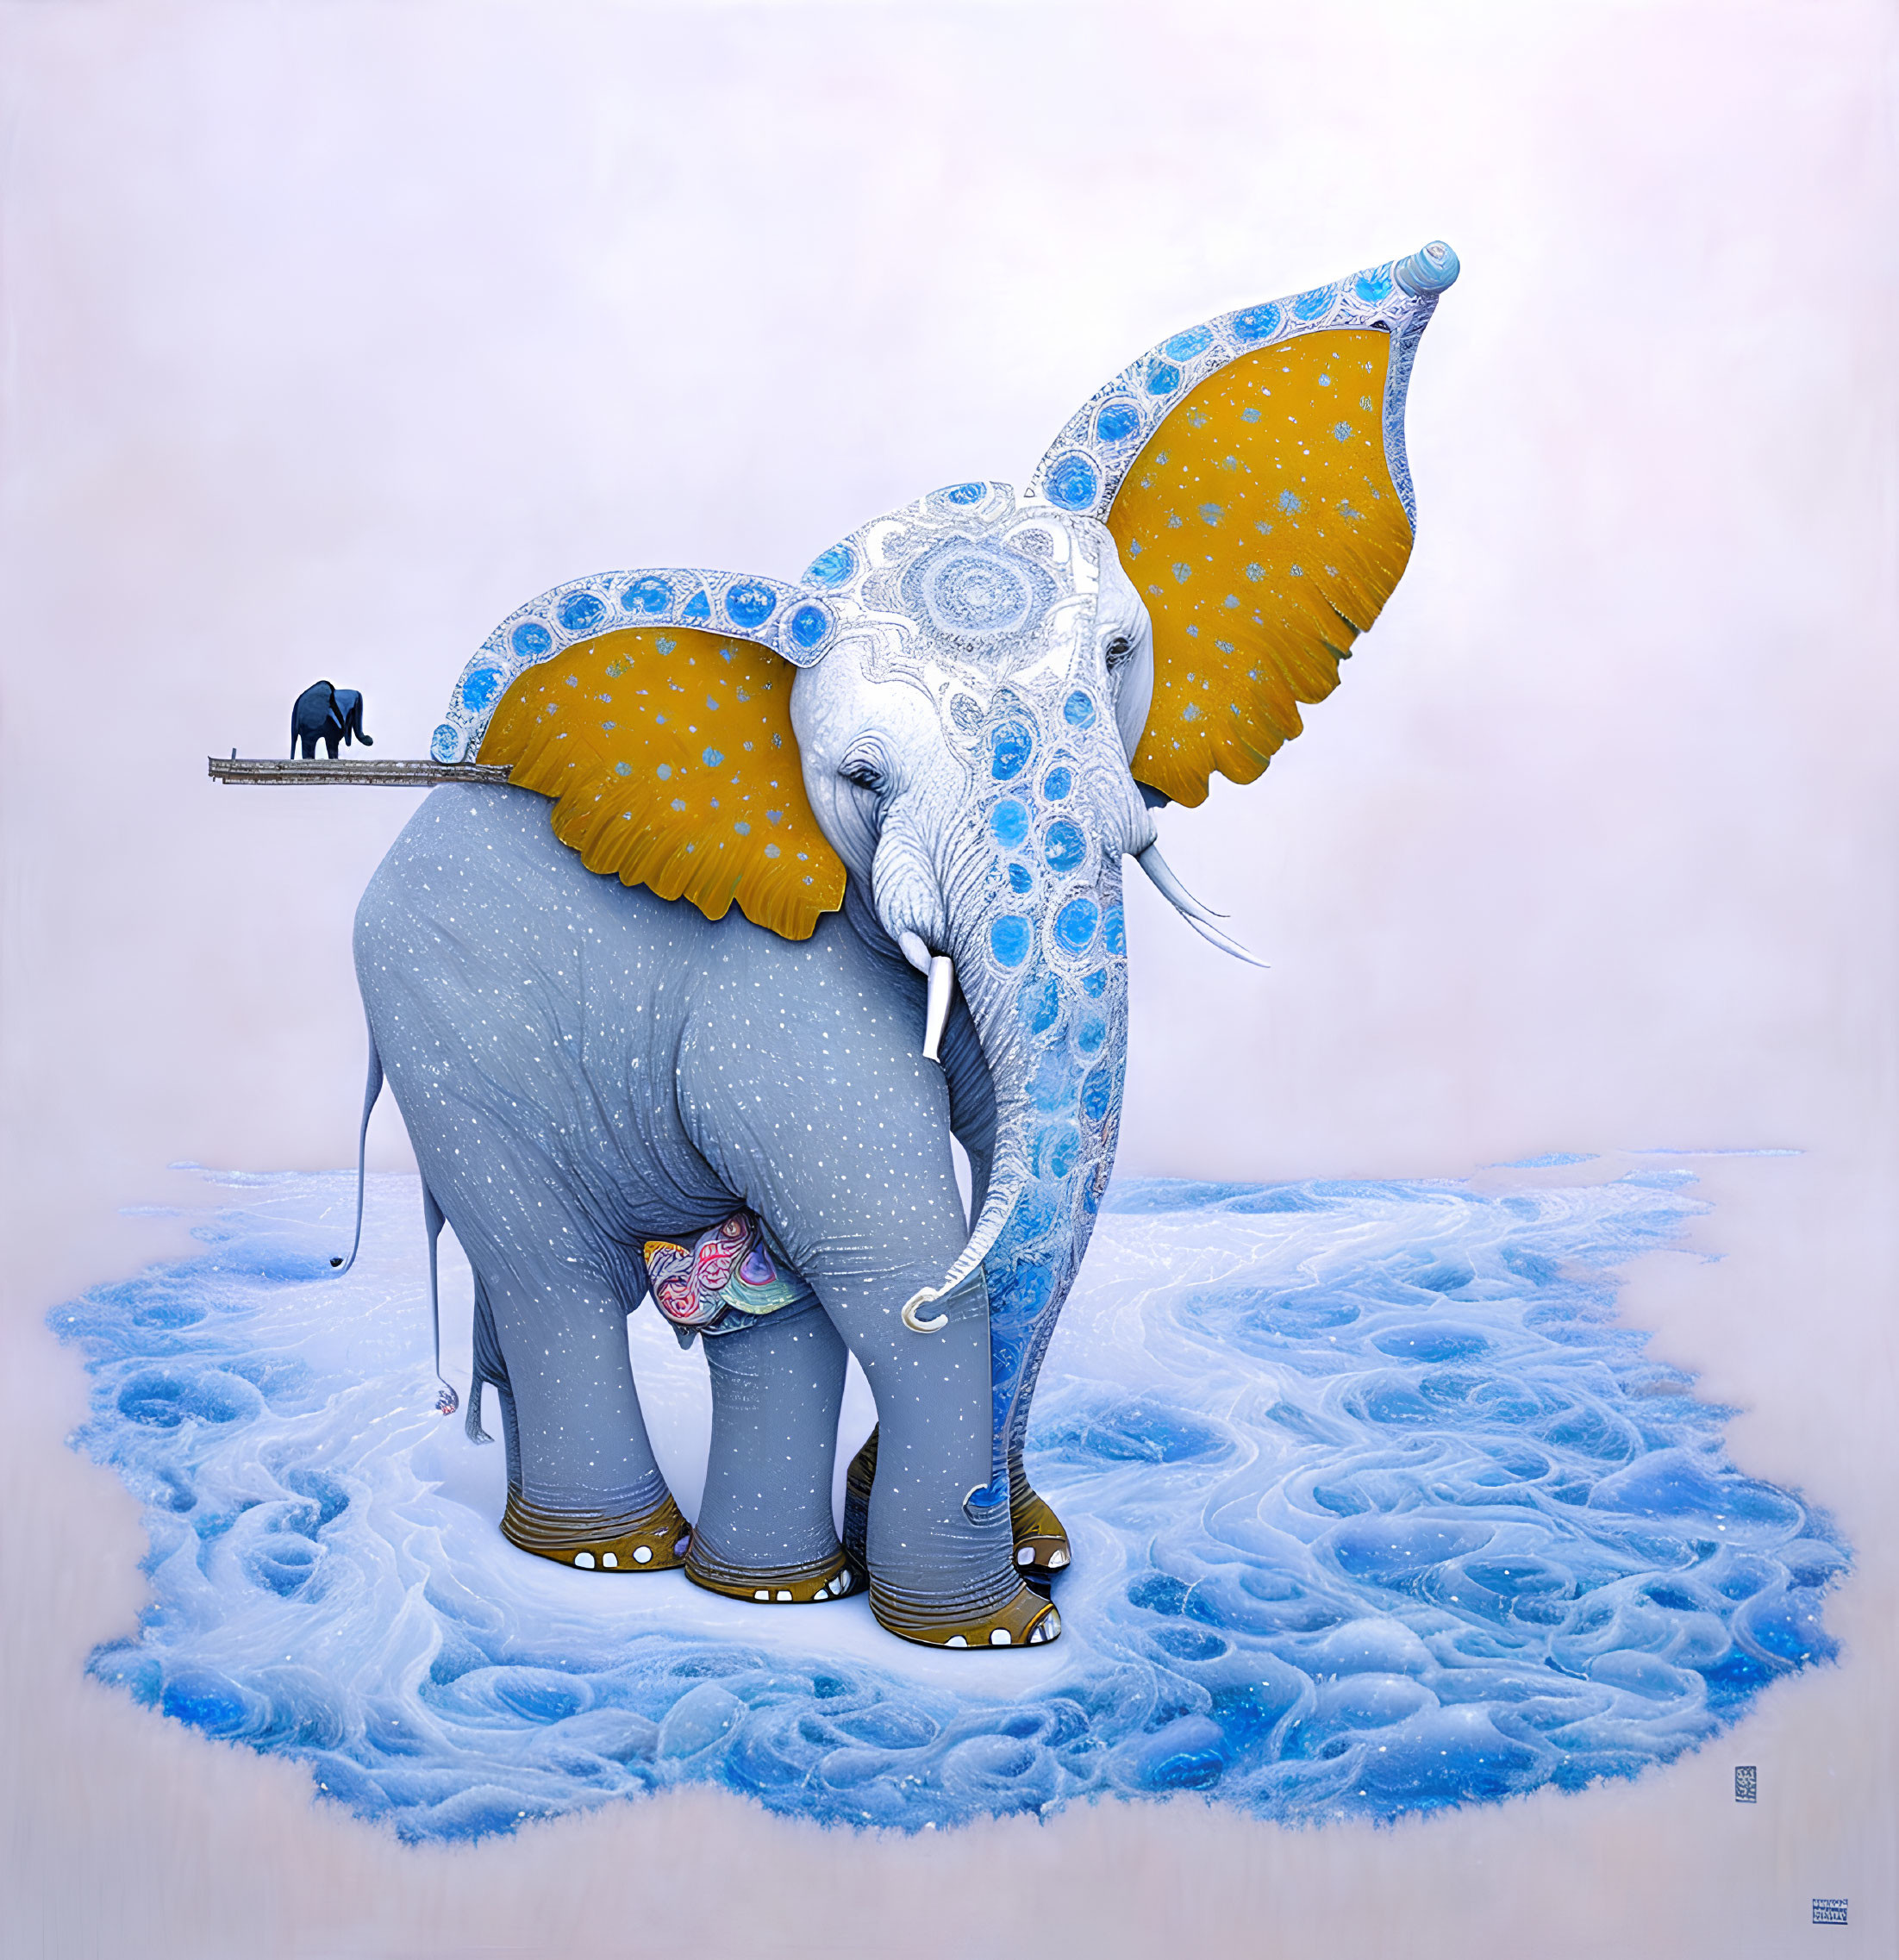 Decorated Elephant Artwork with Blue and Yellow Patterns